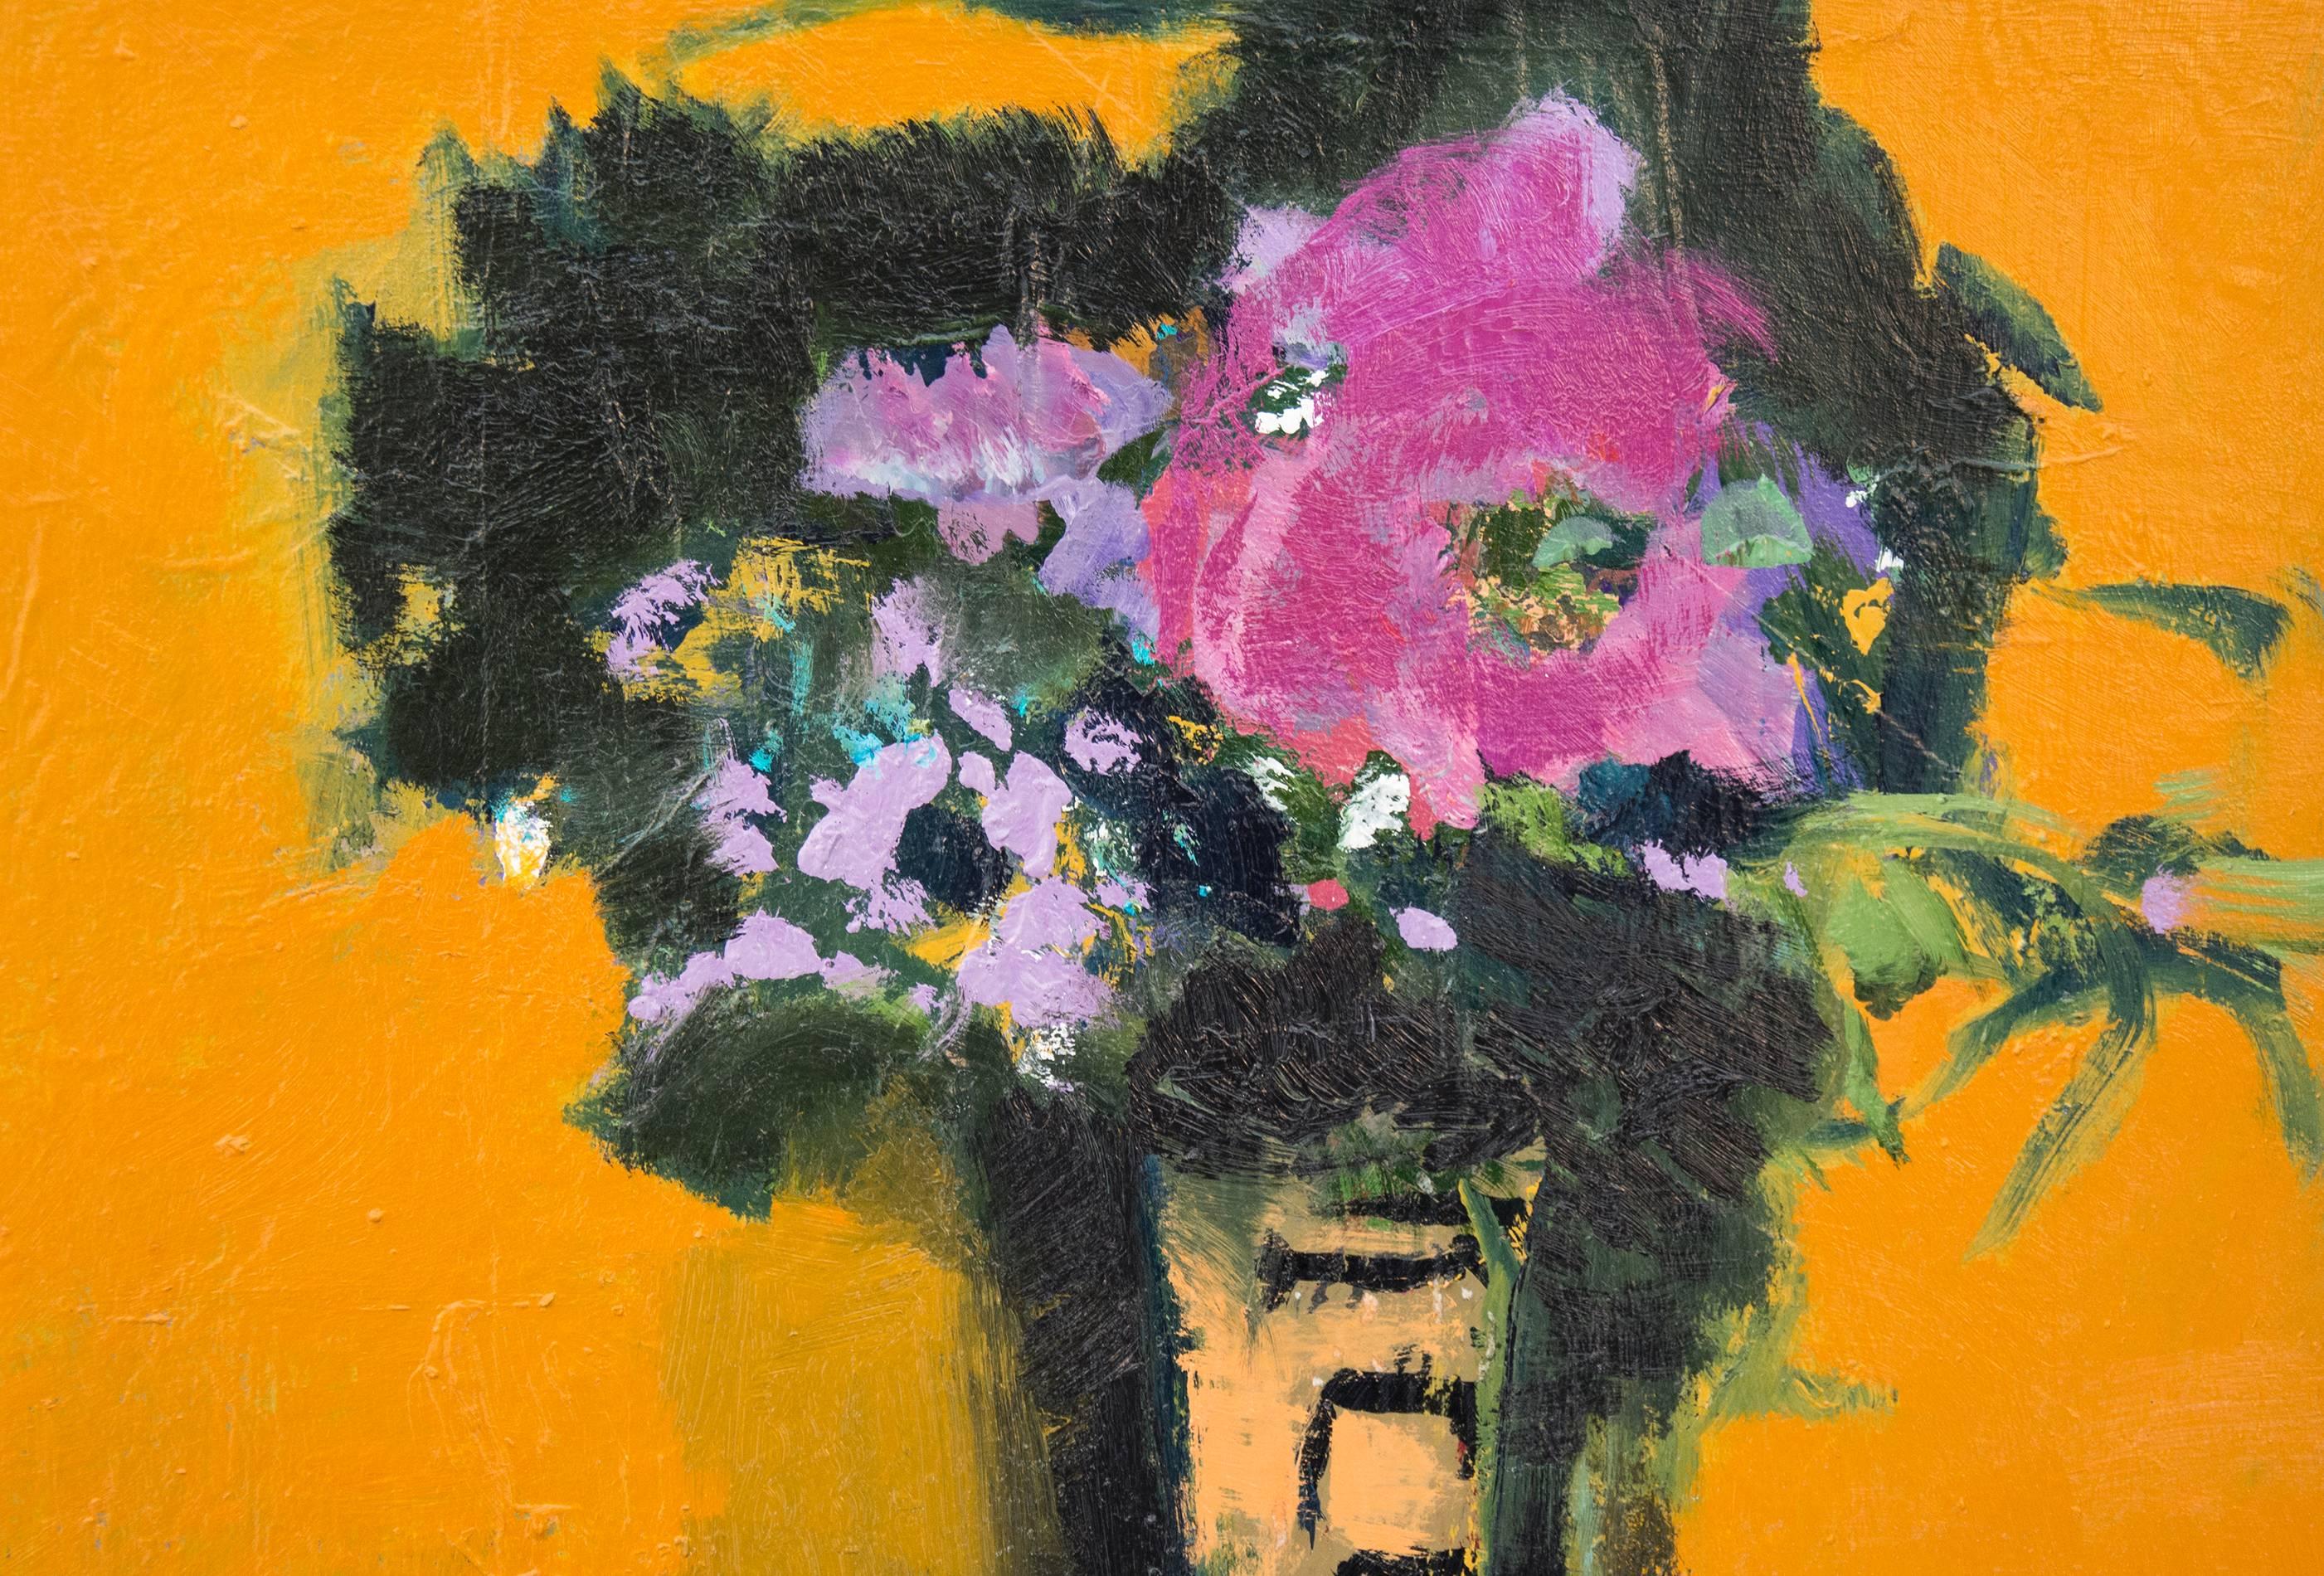 In expressive brushwork, flowers of mauve and yellow with a single large pink rose in a tall vase are framed by deep forest green that vibrates on a ground of tuscan yellow. Pink petals and turquoise taches on the table complete the perfectly square